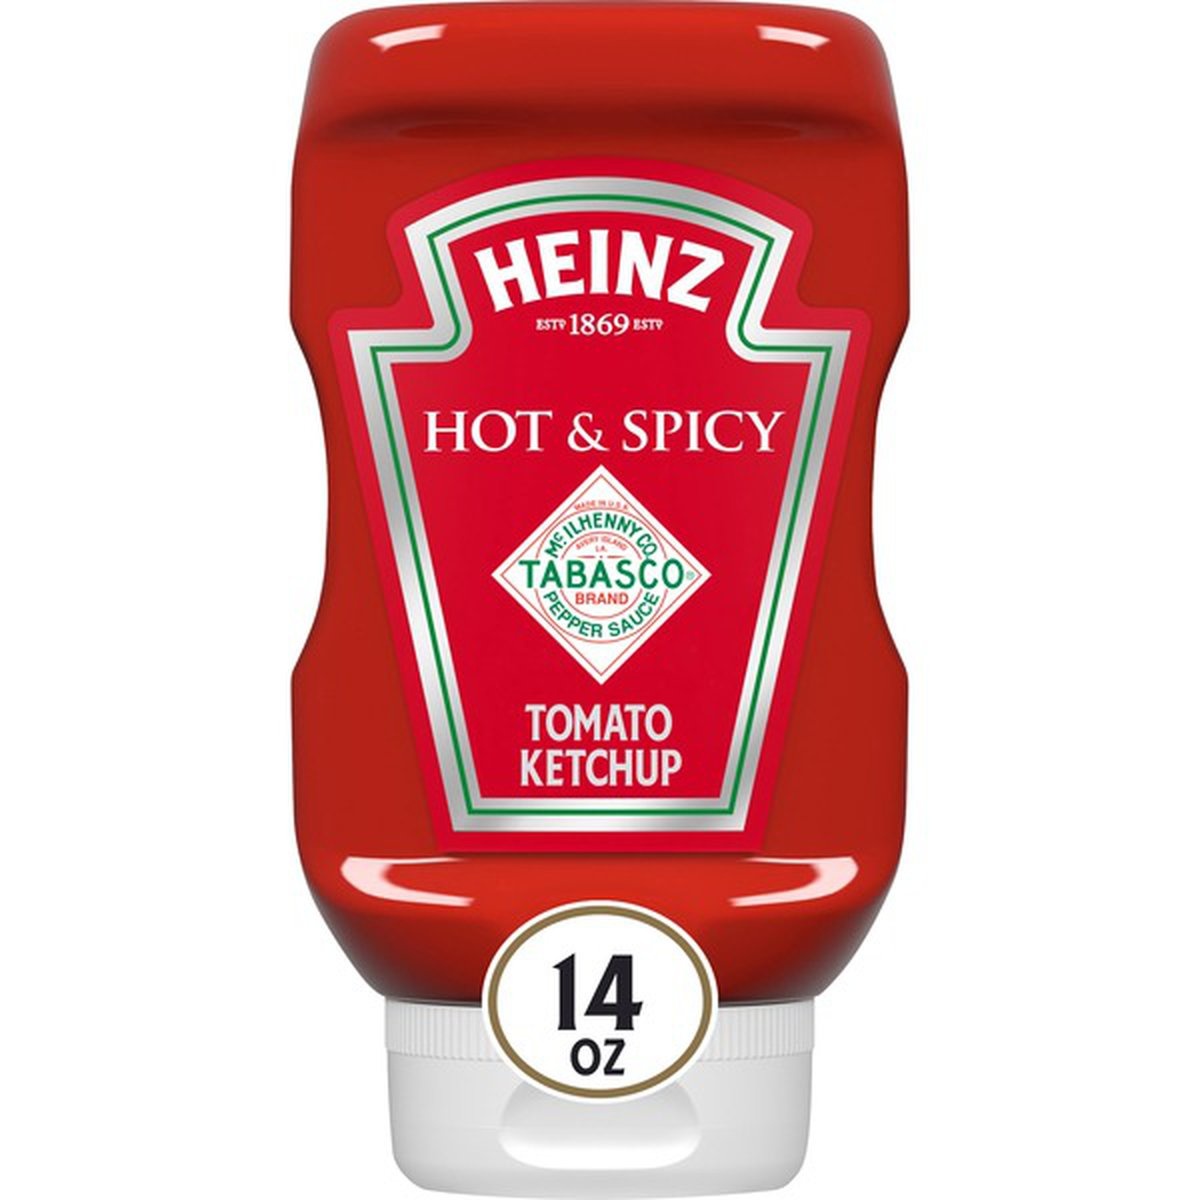 slide 1 of 1, Heinz Hot & Spicy Tomato Ketchup Blended With Tabasco Pepper Sauce, 14 oz